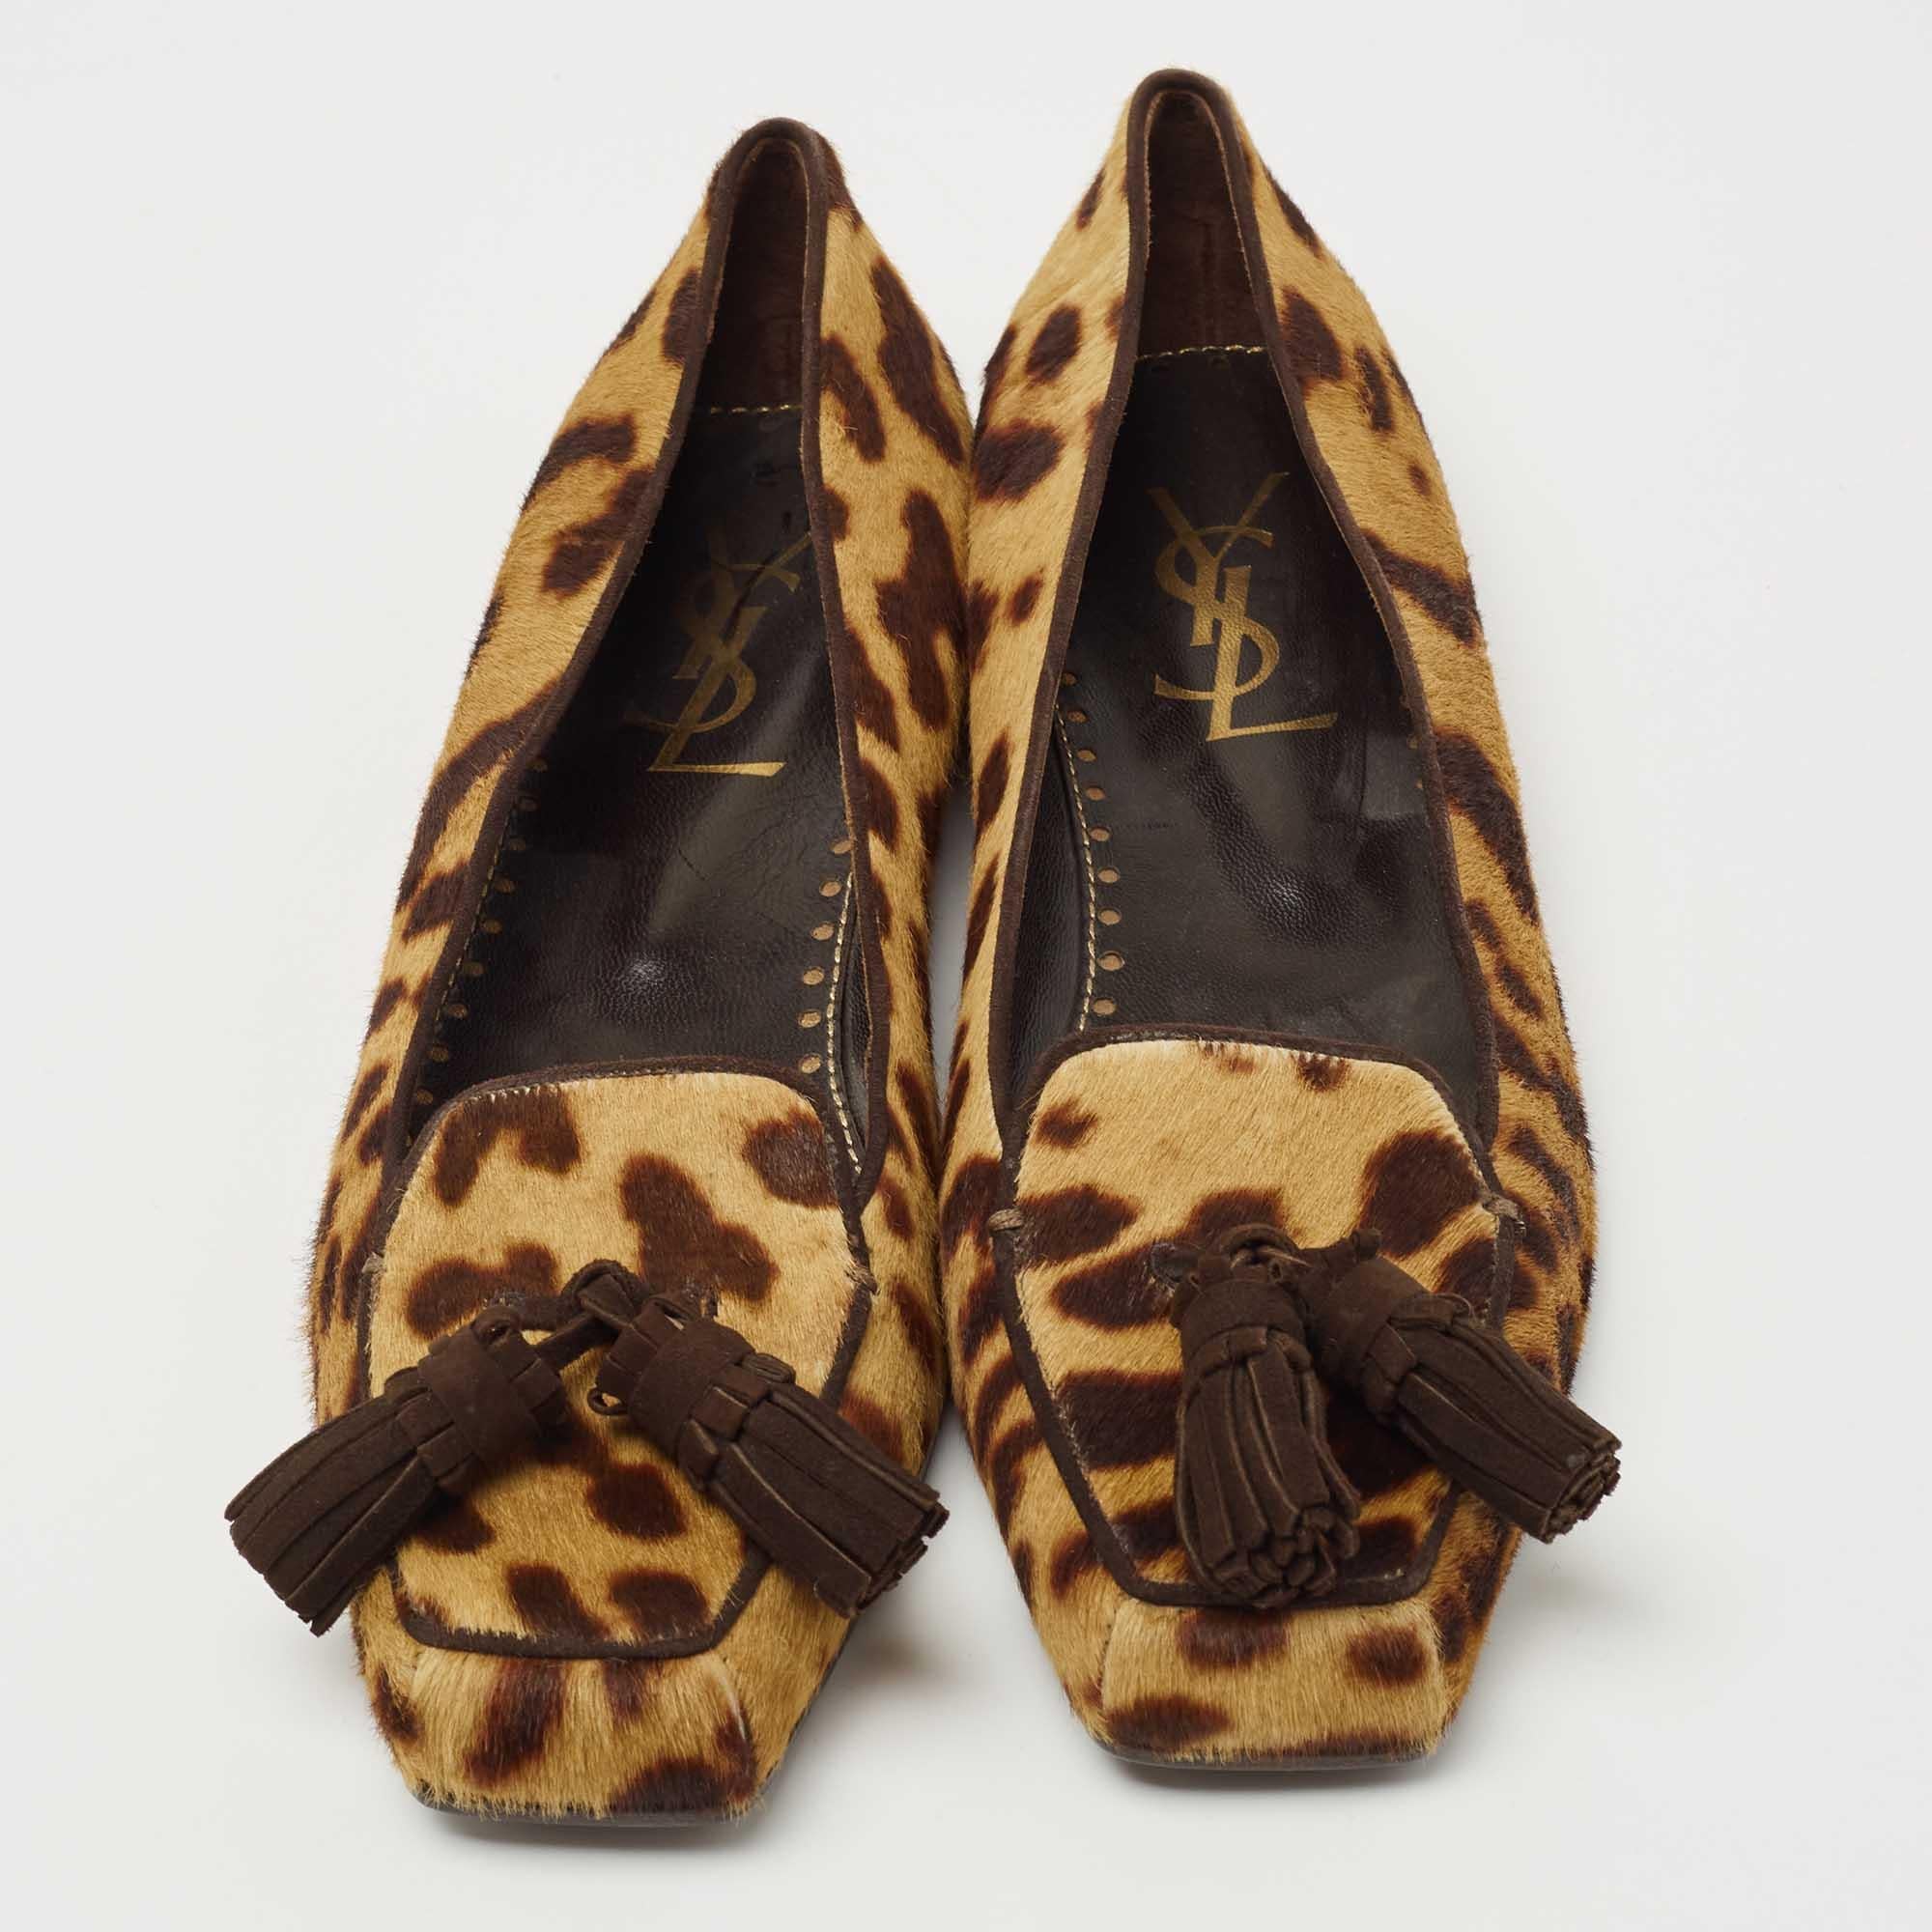 Exquisite and well-crafted, these Saint Laurent loafers are worth owning. They have been crafted using calf hair and they come flaunting leopard-prints all over and tassels on the vamps. The loafers are ideal to wear for special events.

